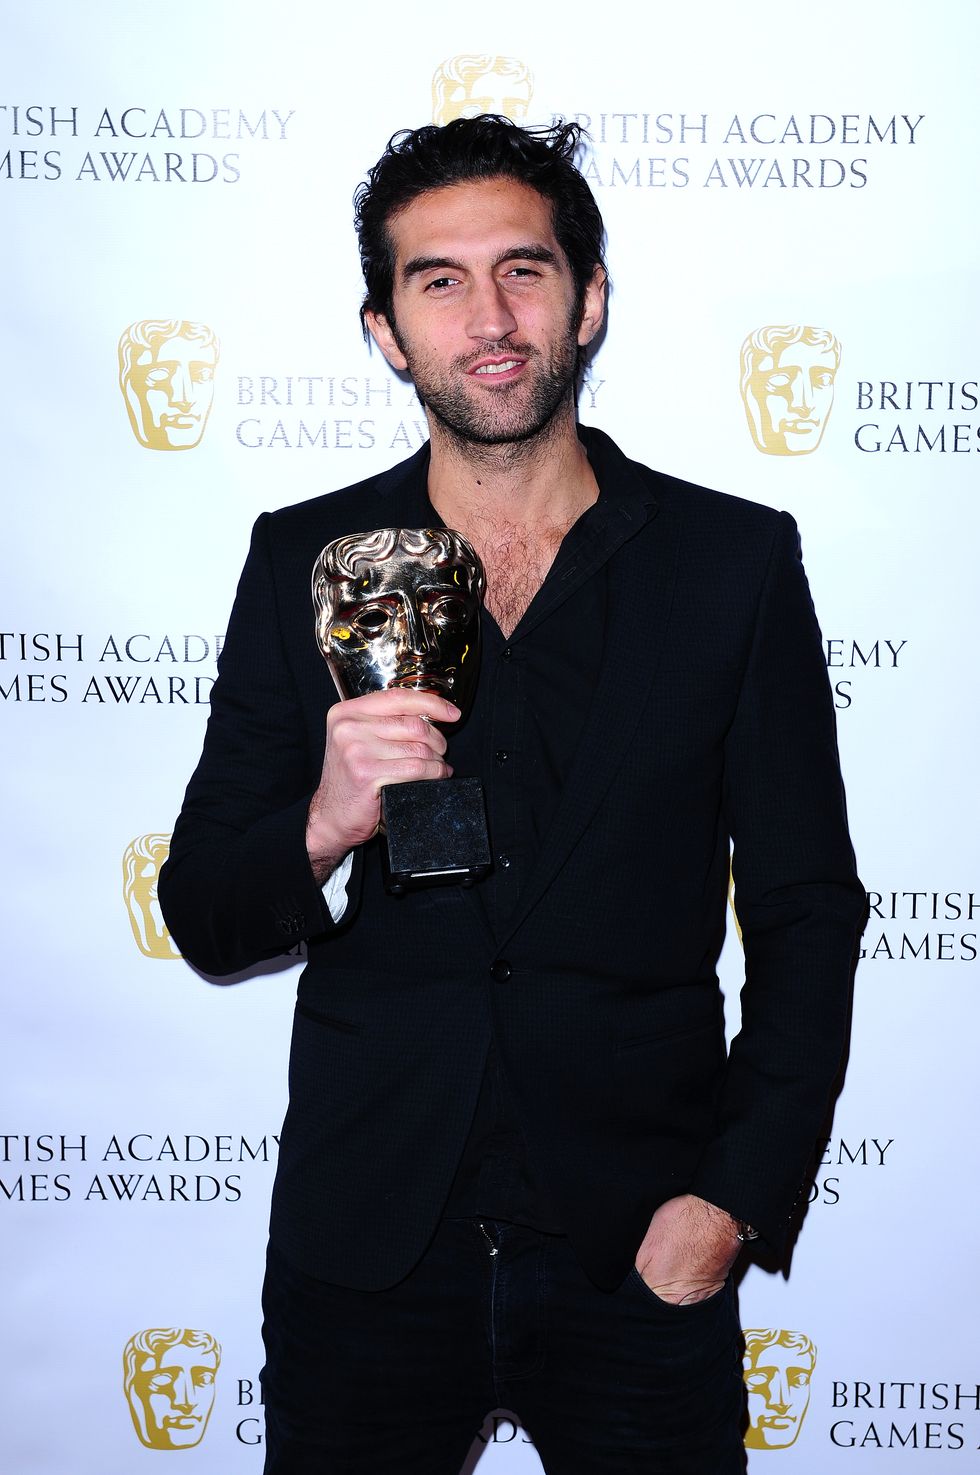 The Last of Us wins BAFTA Game of the Year Award, Steam sale for